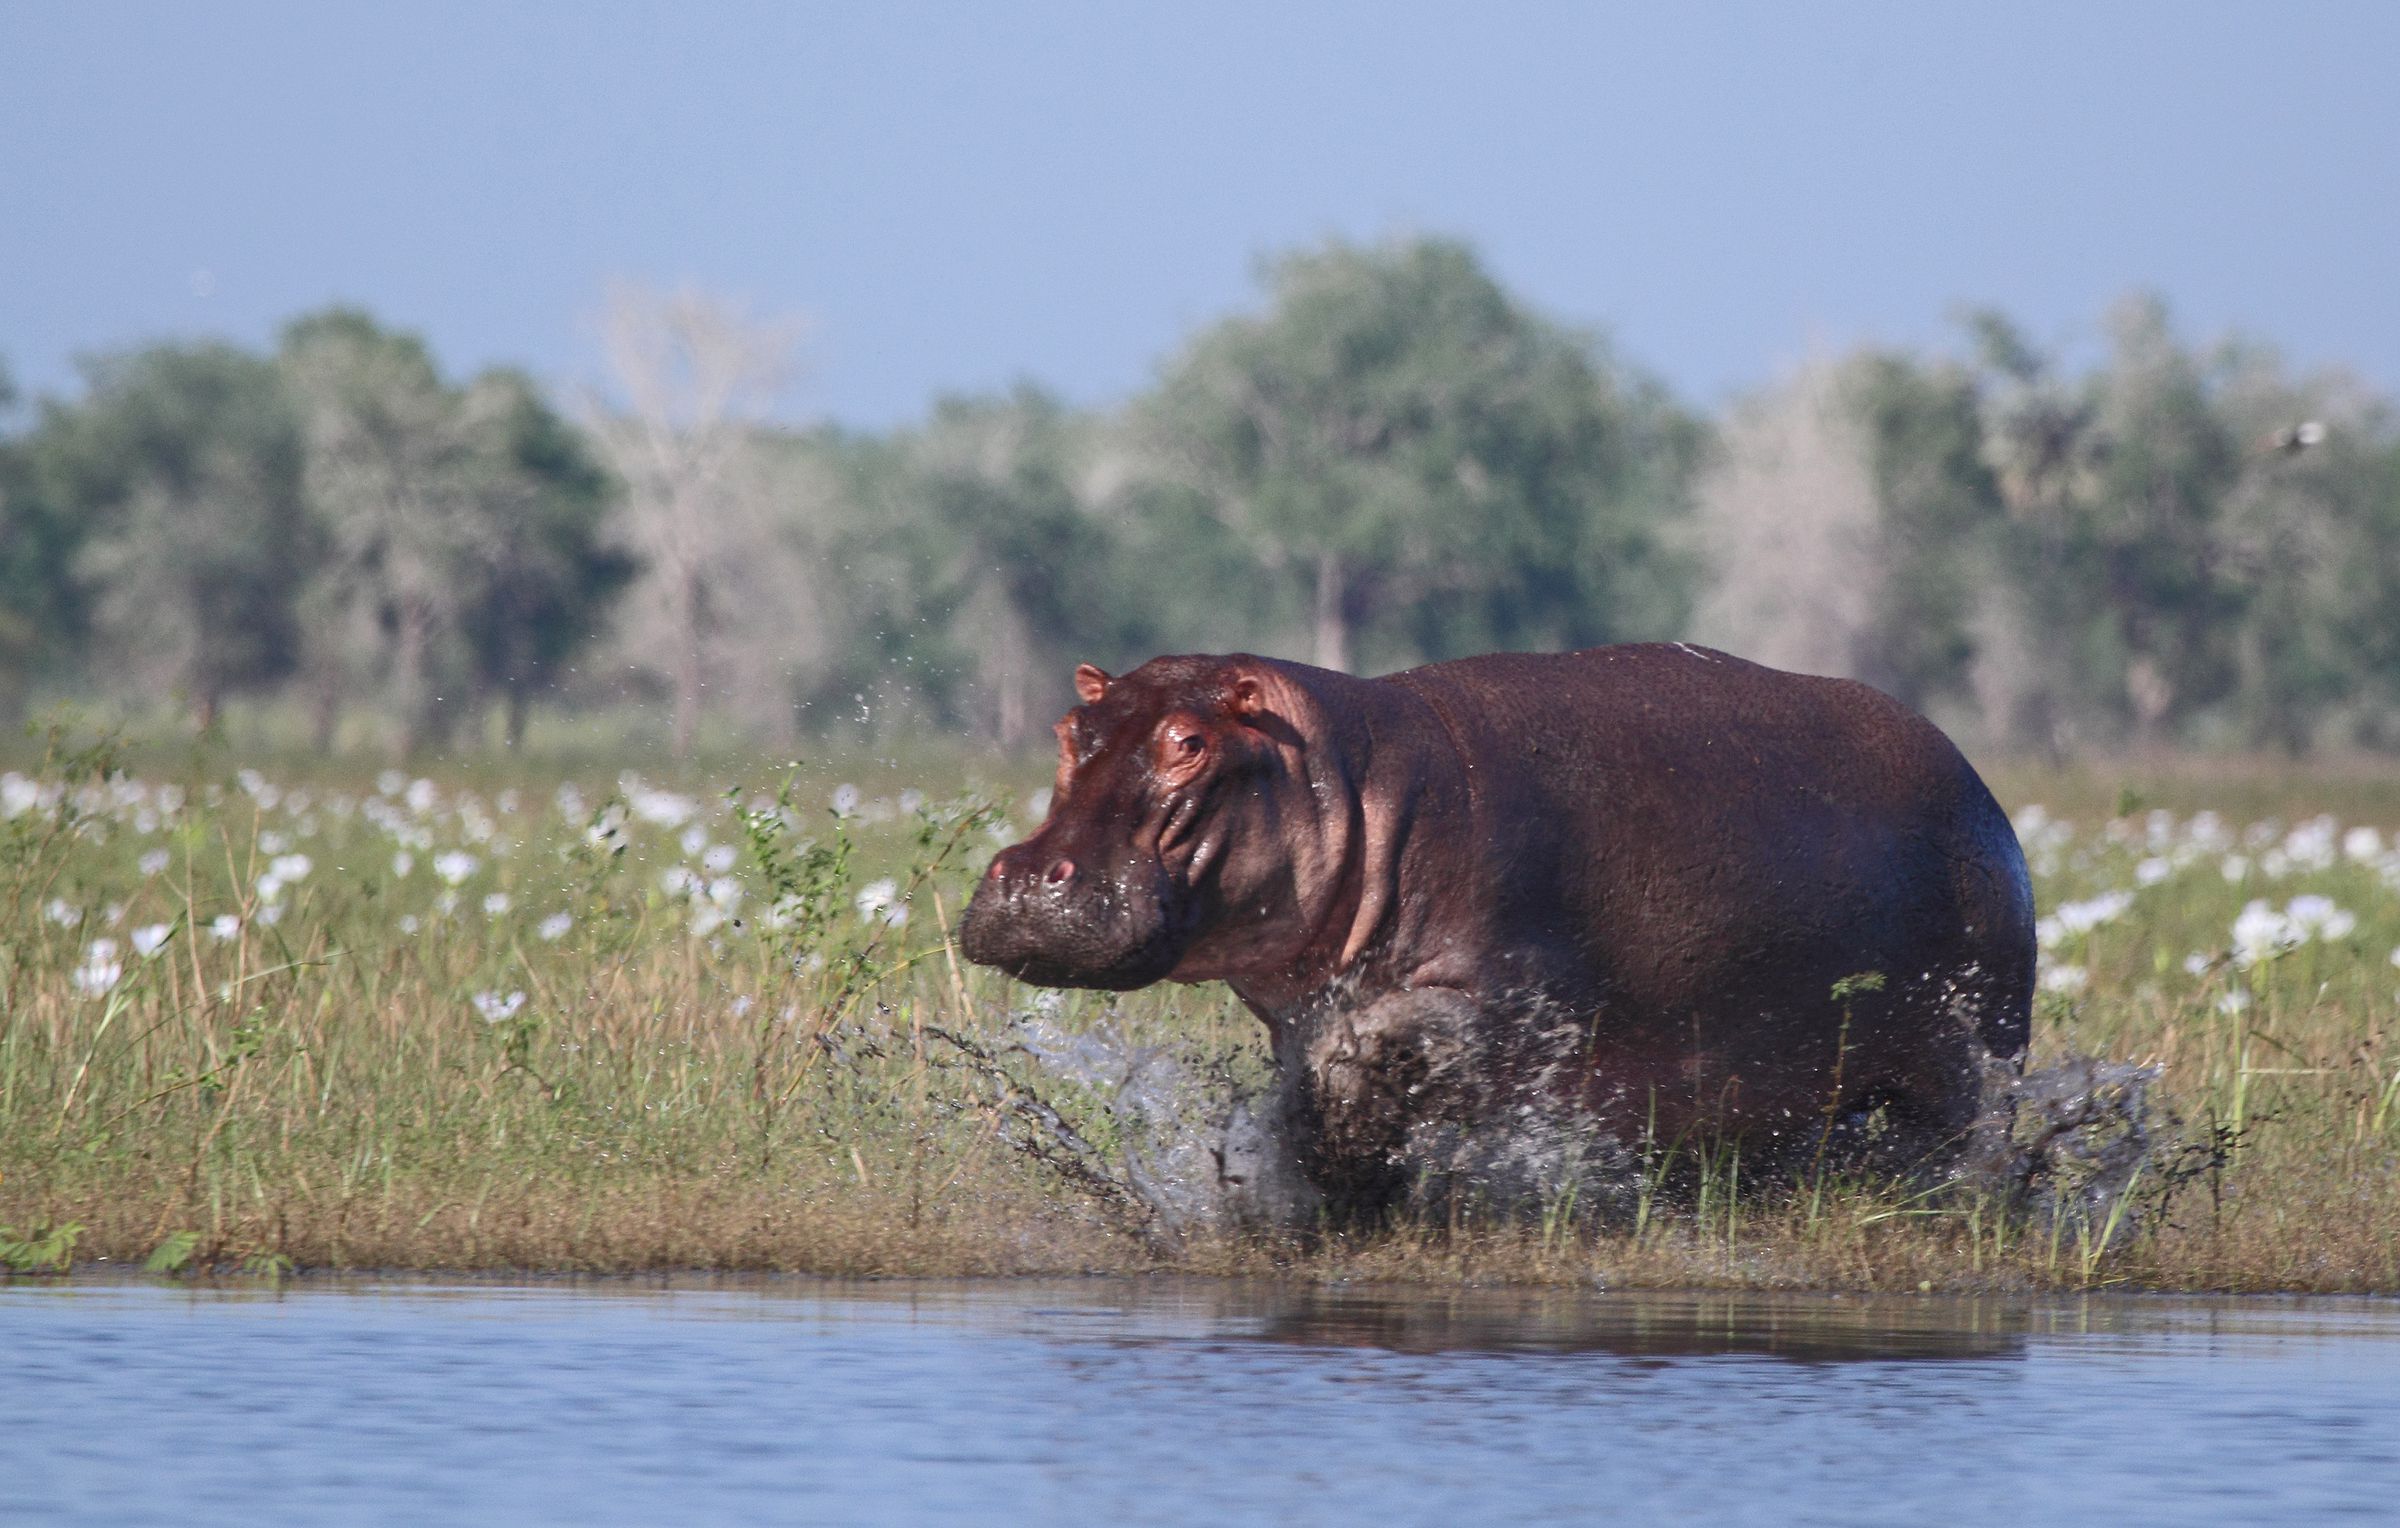 A hippopotamus charges into the waters of Lake Urema, in Gorongosa National Park, Mozambique.